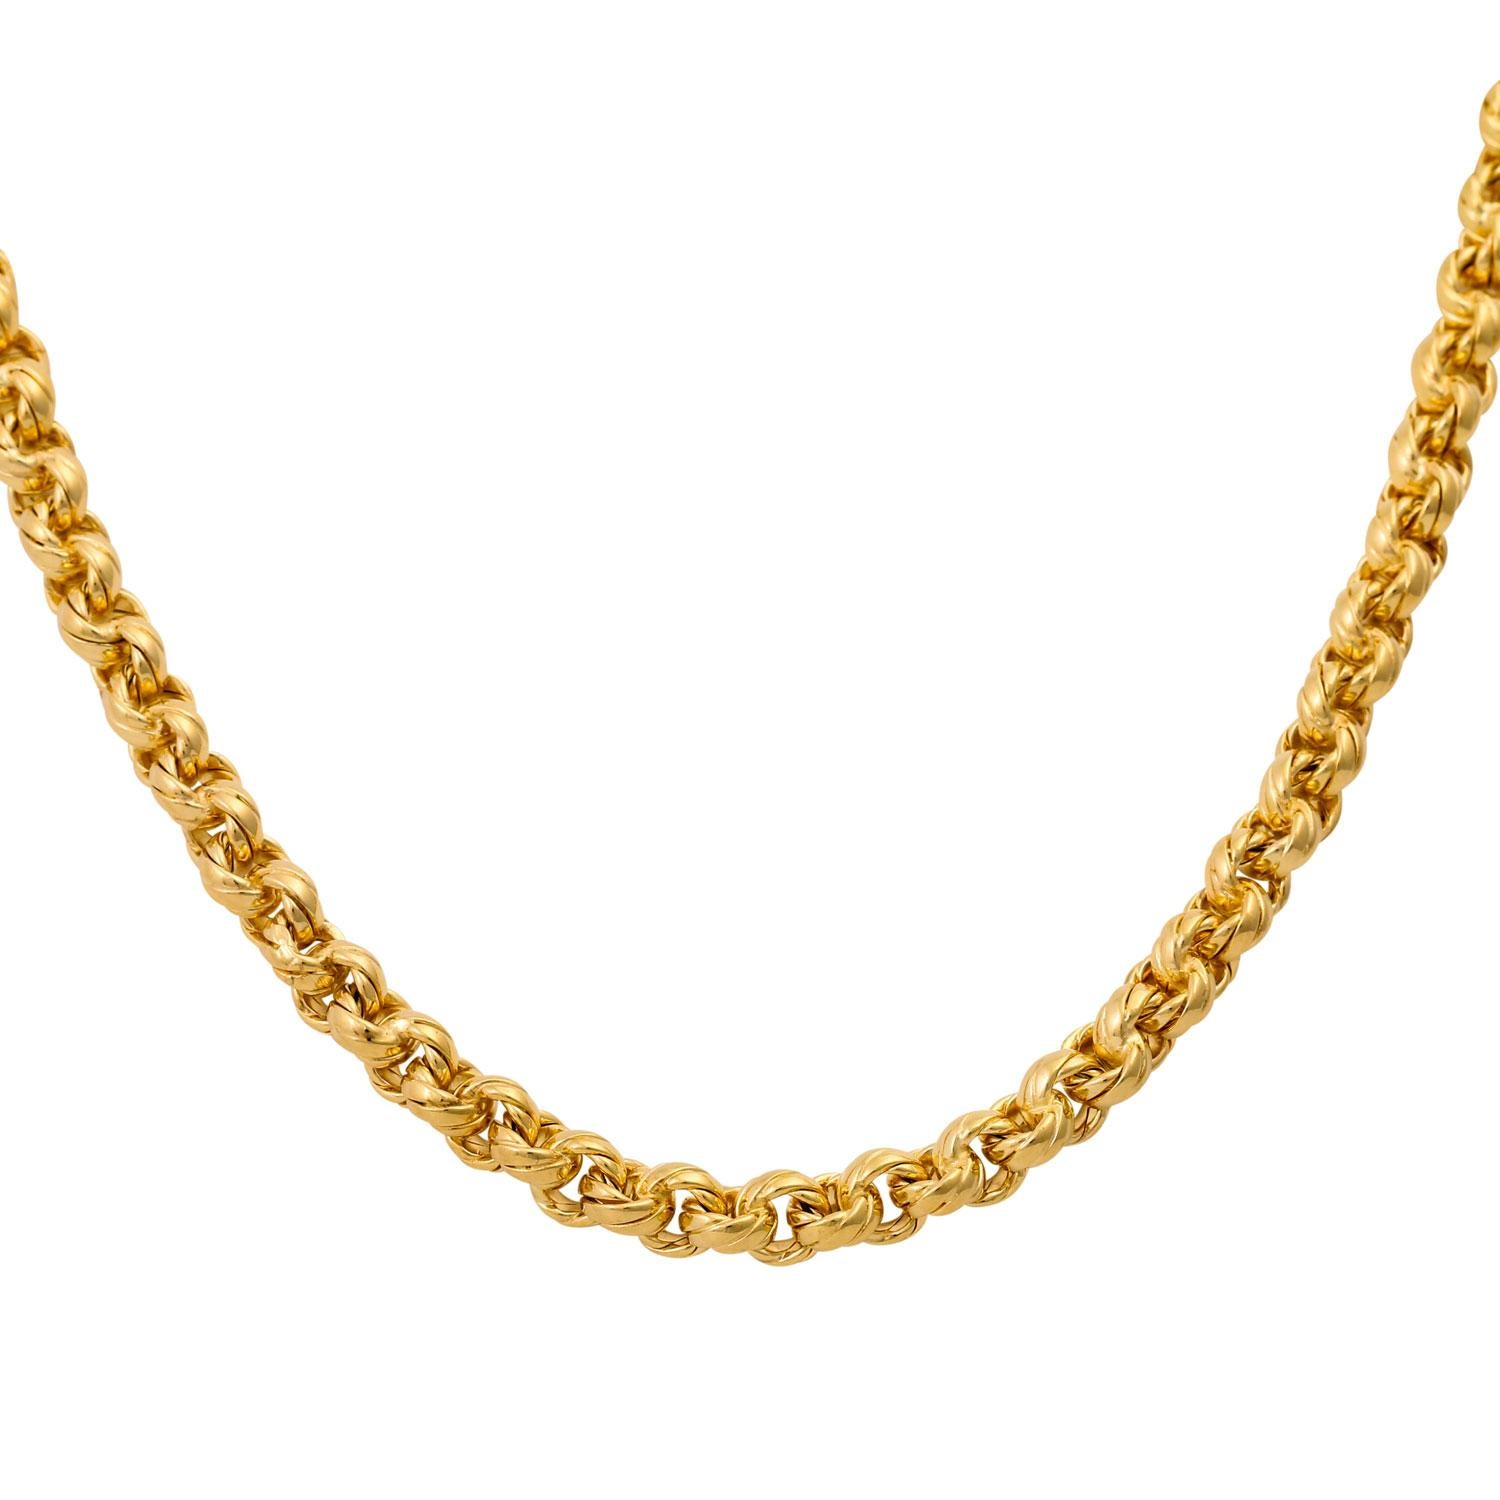 Pea necklace, GG 18 K. L.: approx. 45 cm. Handwork!
